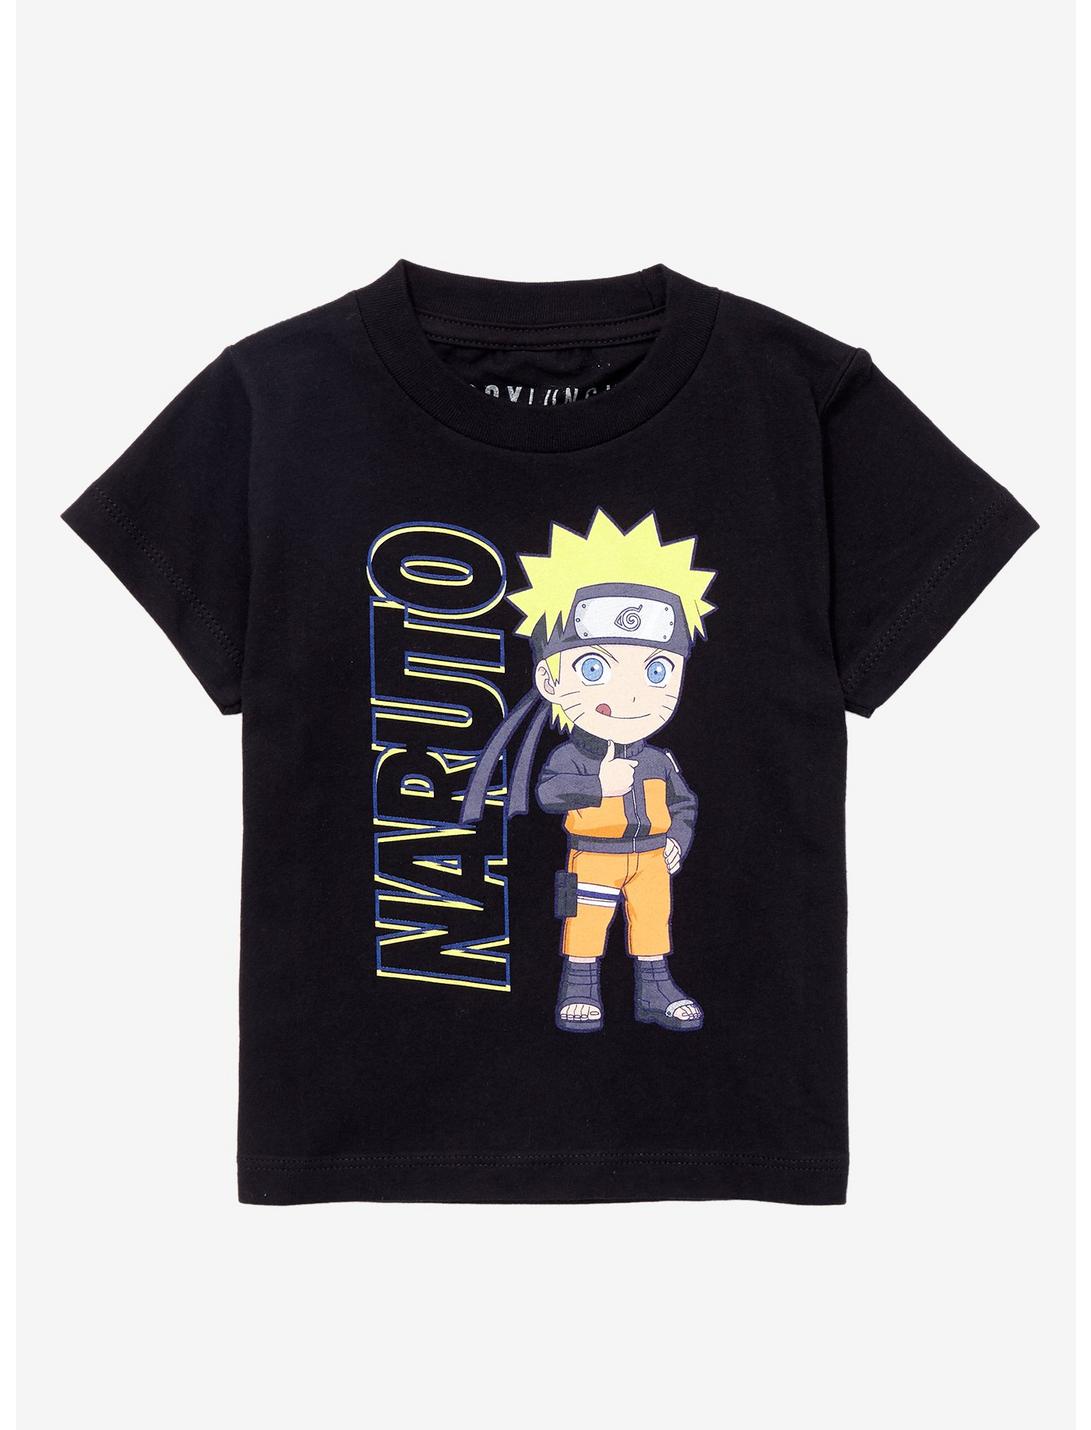 Naruto Shippuden Thumbs Up Toddler T-Shirt - BoxLunch Exclusive, BLACK, hi-res